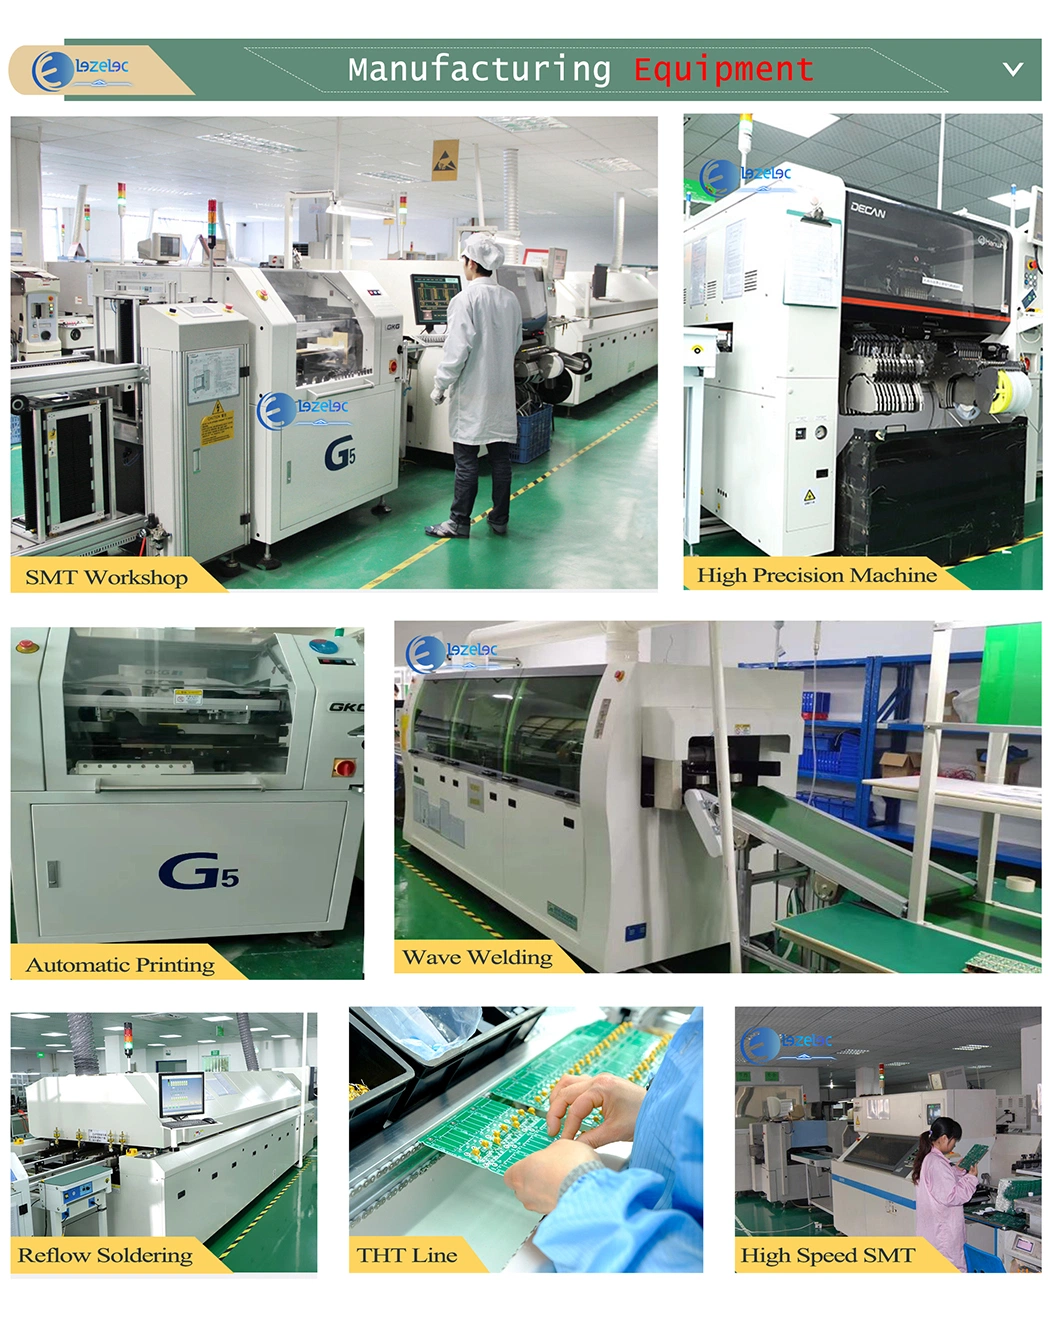 PCB/Printed Circuit Board Manufacturer Multilayer ISO Automotive Electronics Medical UL HDI Board